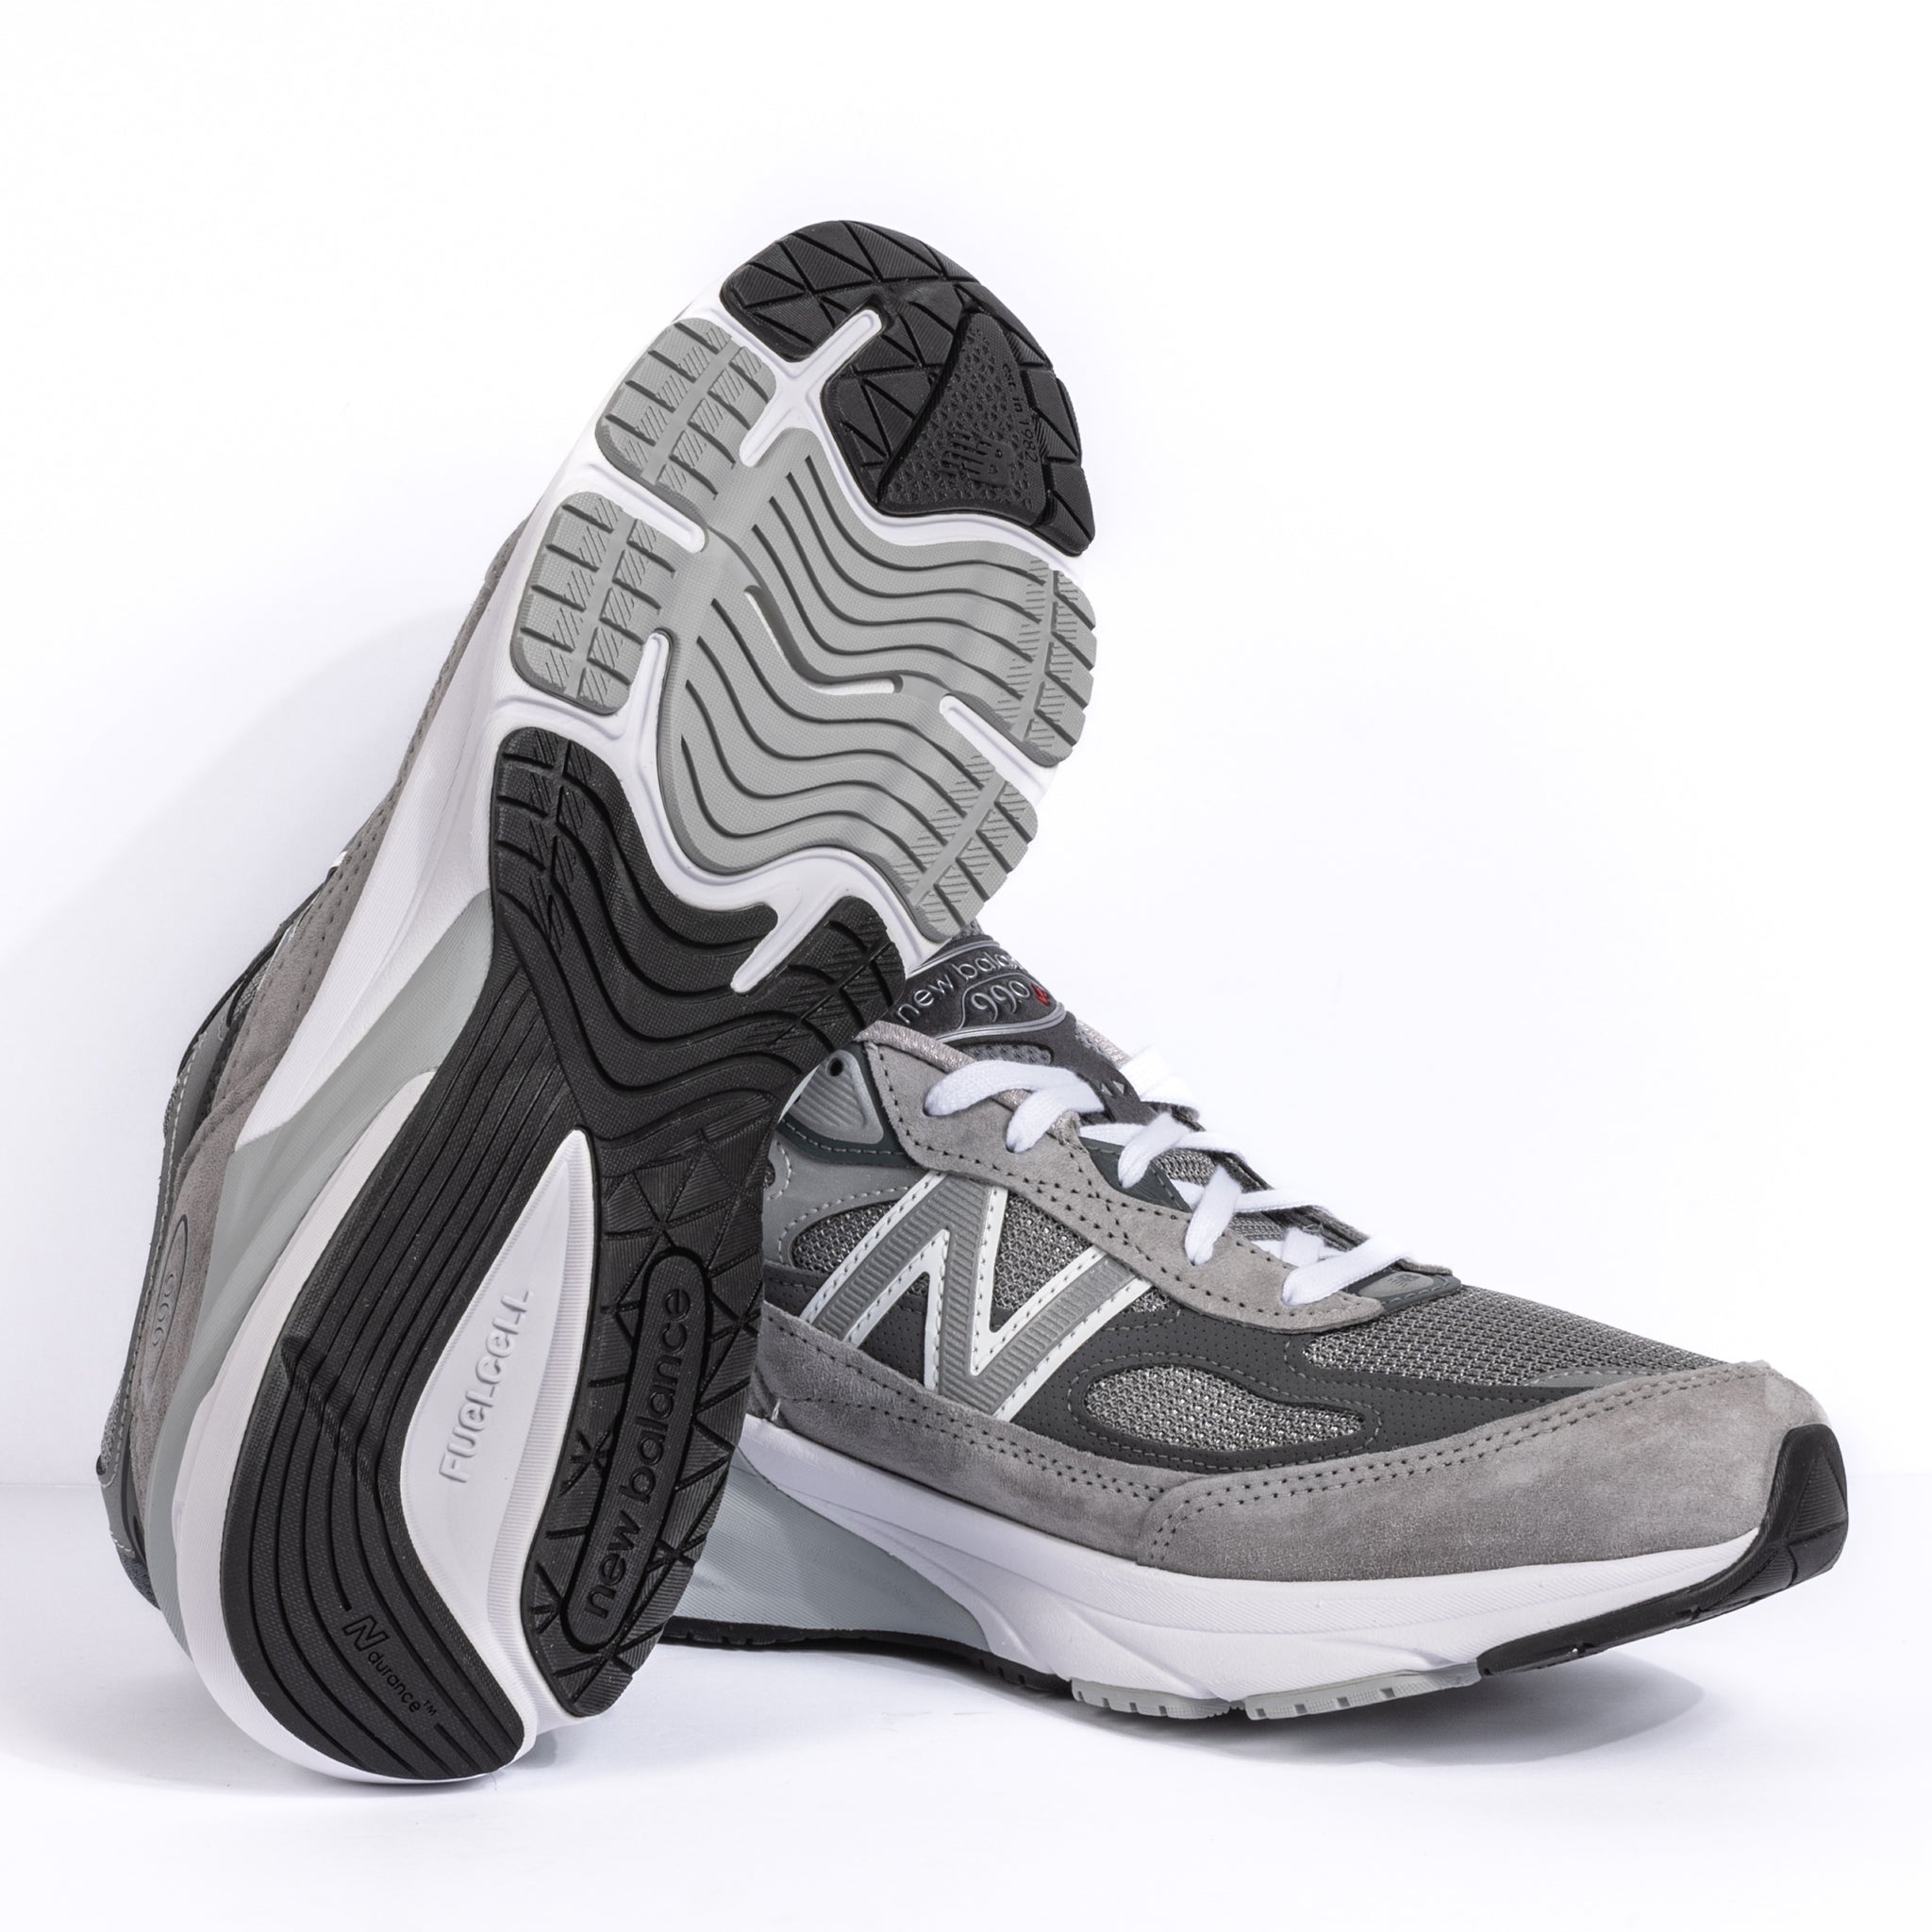 THE 990 V6 New Balance/Men's - GREY - SUEDE – Plaza Shoe Store